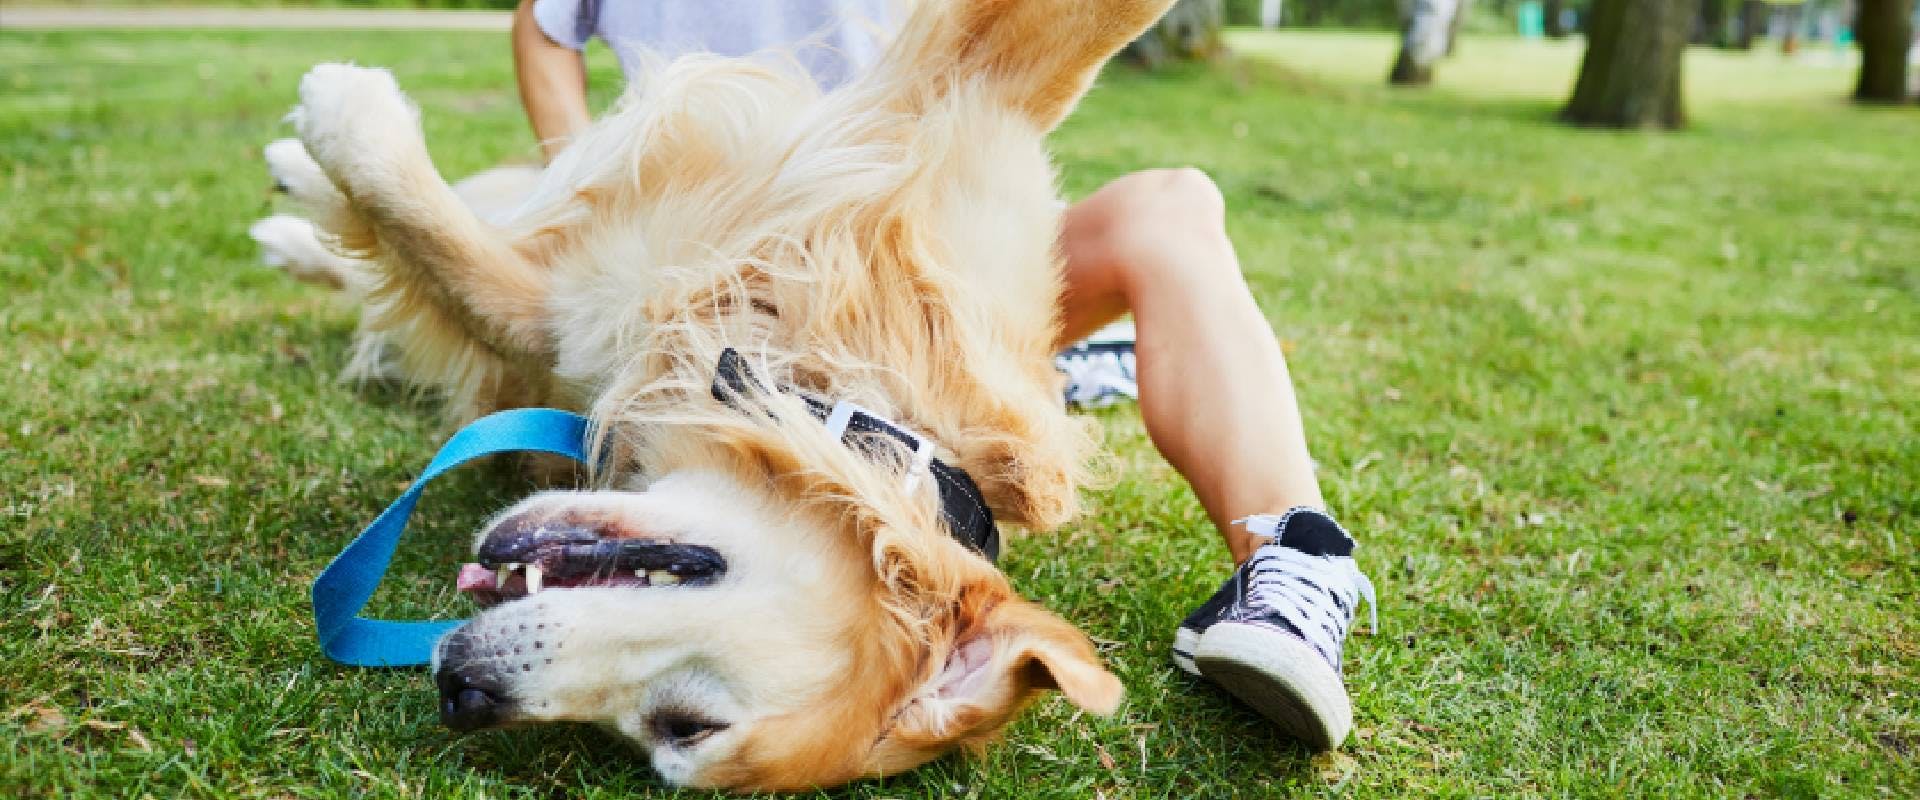 Golden Retriever rolling on the grass in a dog park with pet parent